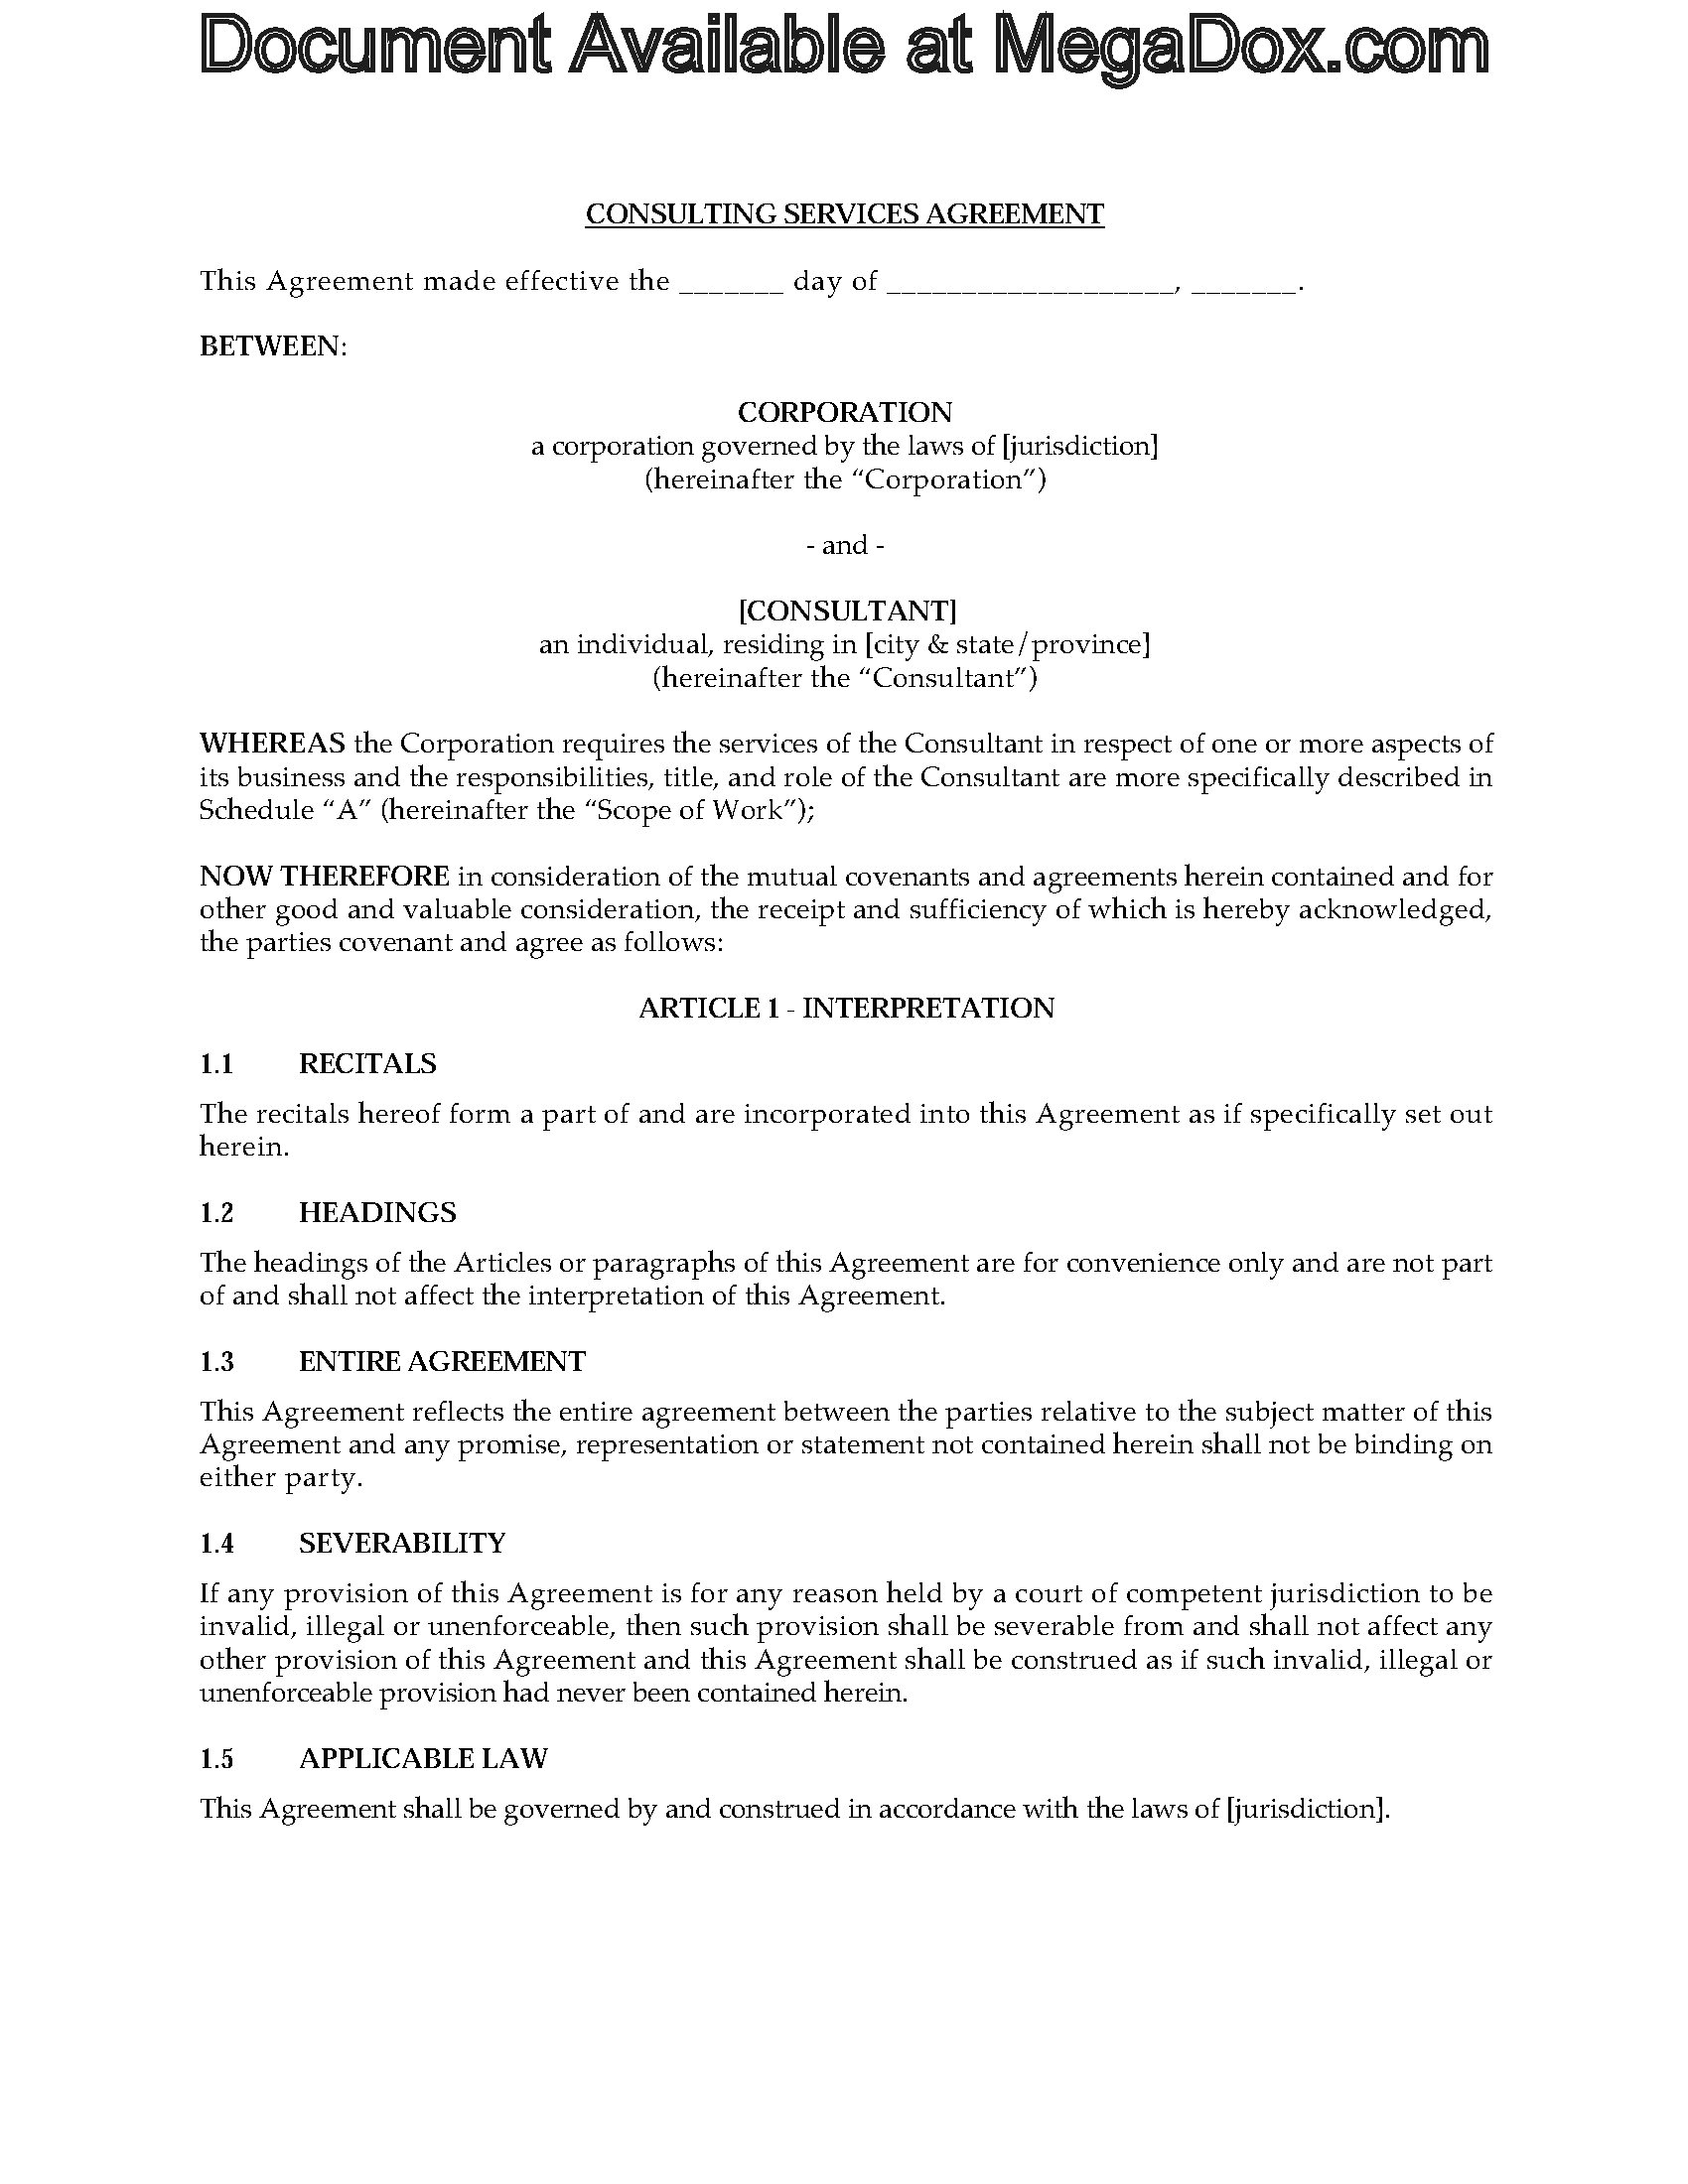 canada consulting services agreement